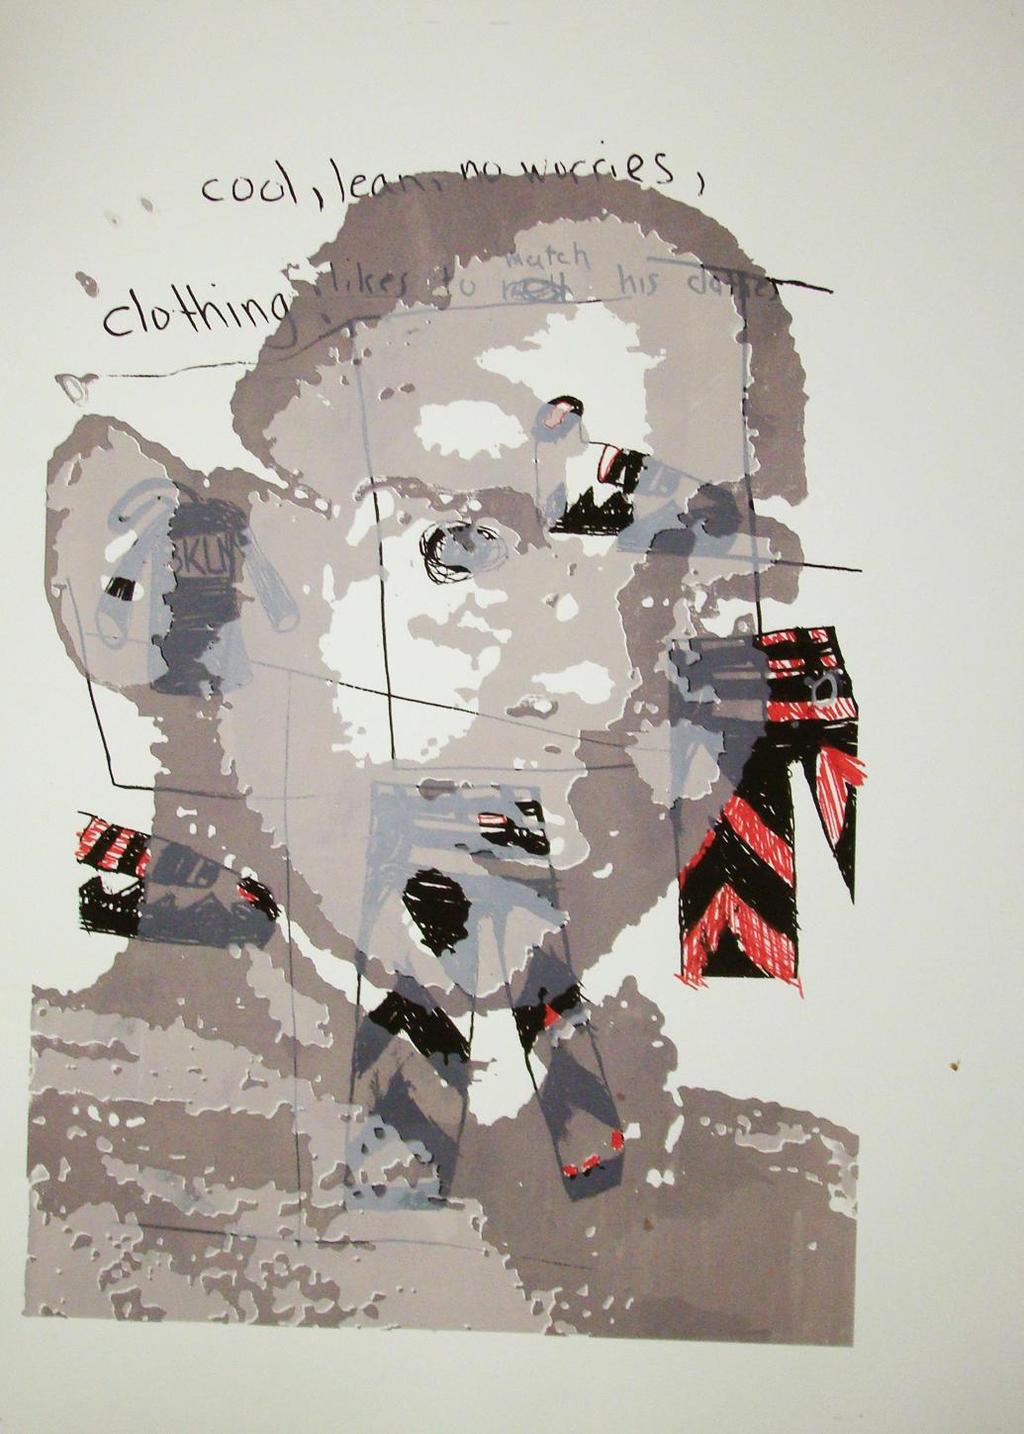 Tayler Morgan and Anne Brennan, He Likes to Match His Clothes, 2010,28 x 20, felt tip markers and screenprint on paper.